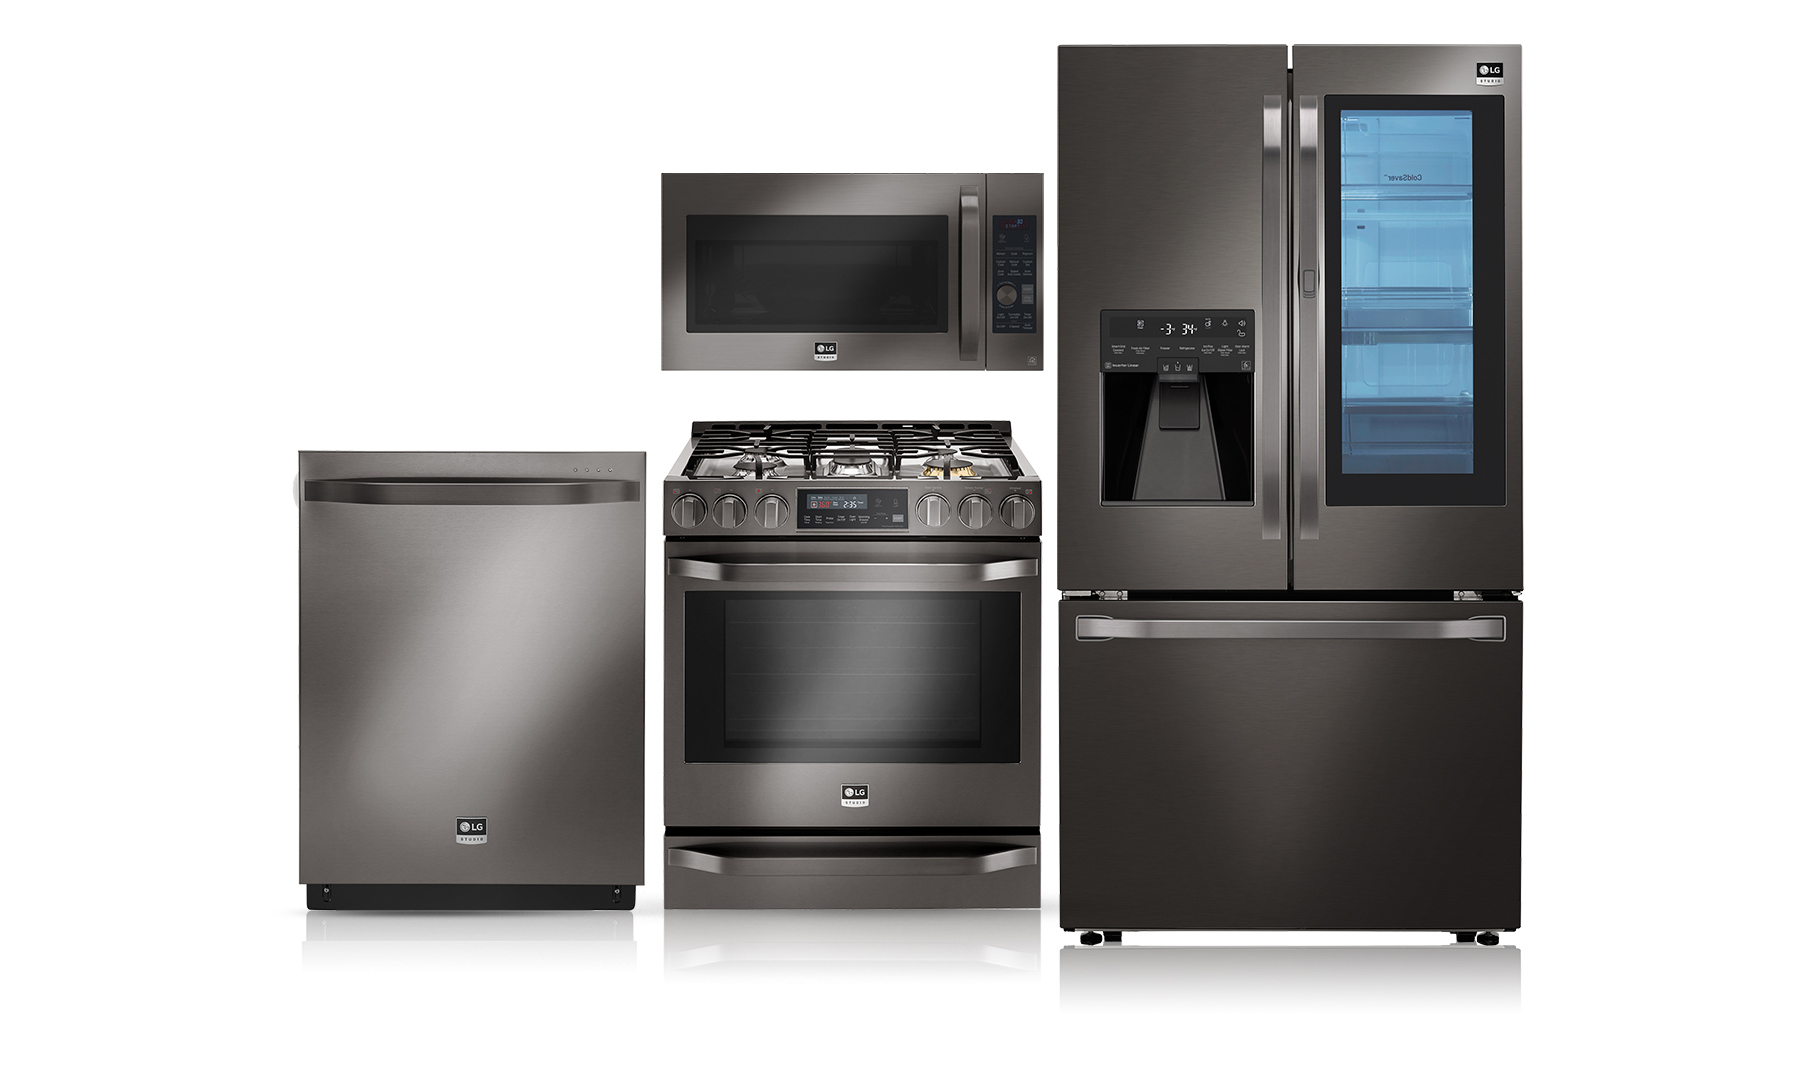 The LG-pioneered Black Stainless Steel finish elevates the traditional stainless steel look that has become the standard in today's homes with a satin-smooth, warm and sophisticated finish unlike any other.